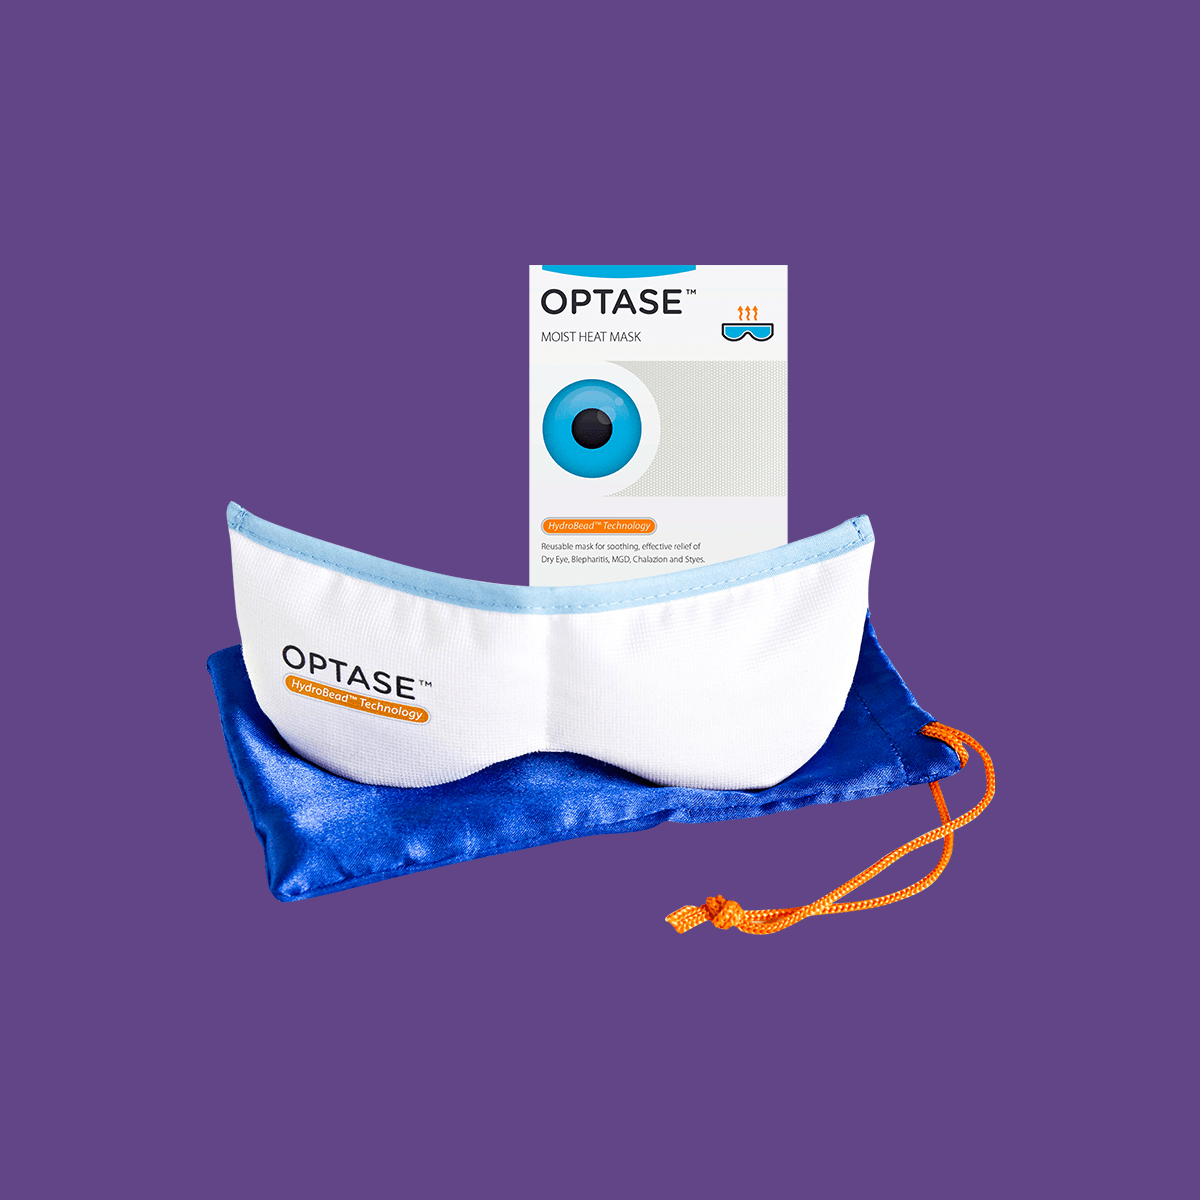 Optase Dry Eye Kit (C) Heat Mask, Cleaning Gel, and Intense Drops - Dryeye Rescue